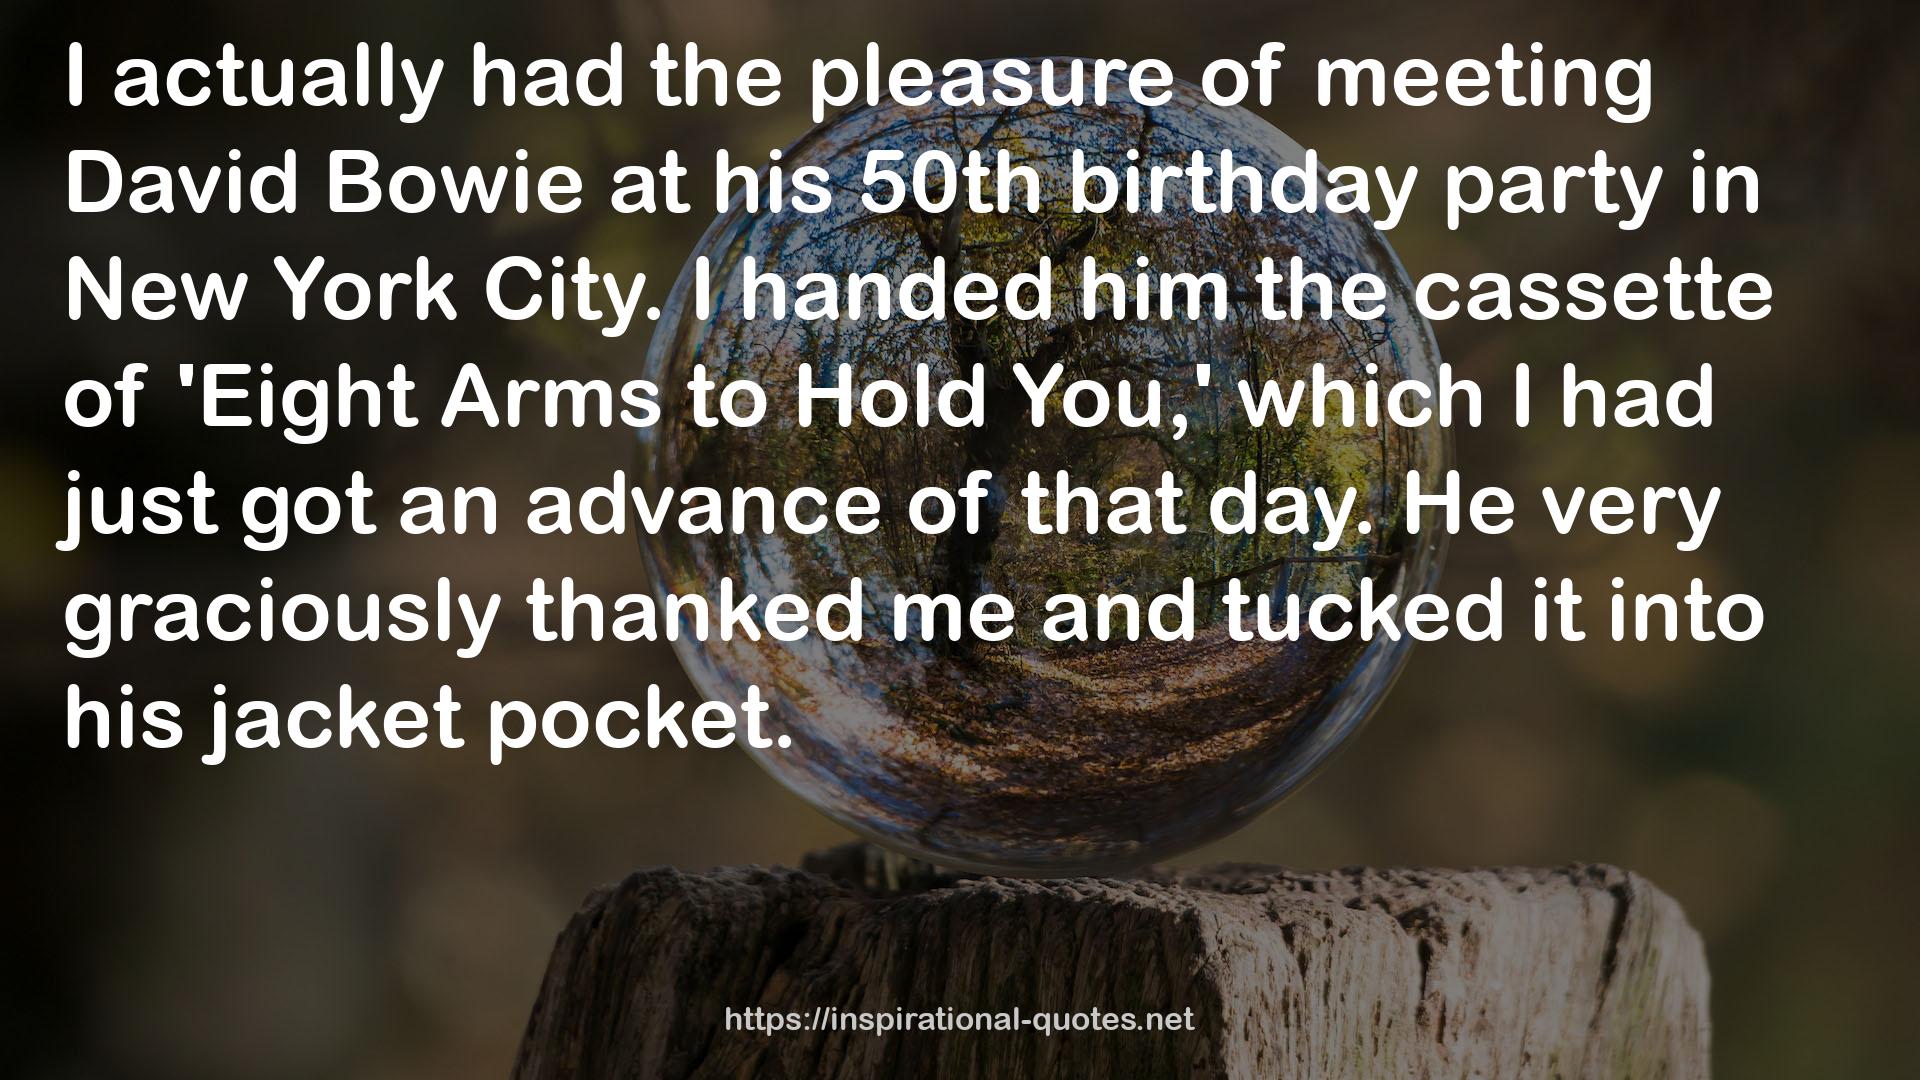 his 50th birthday party  QUOTES